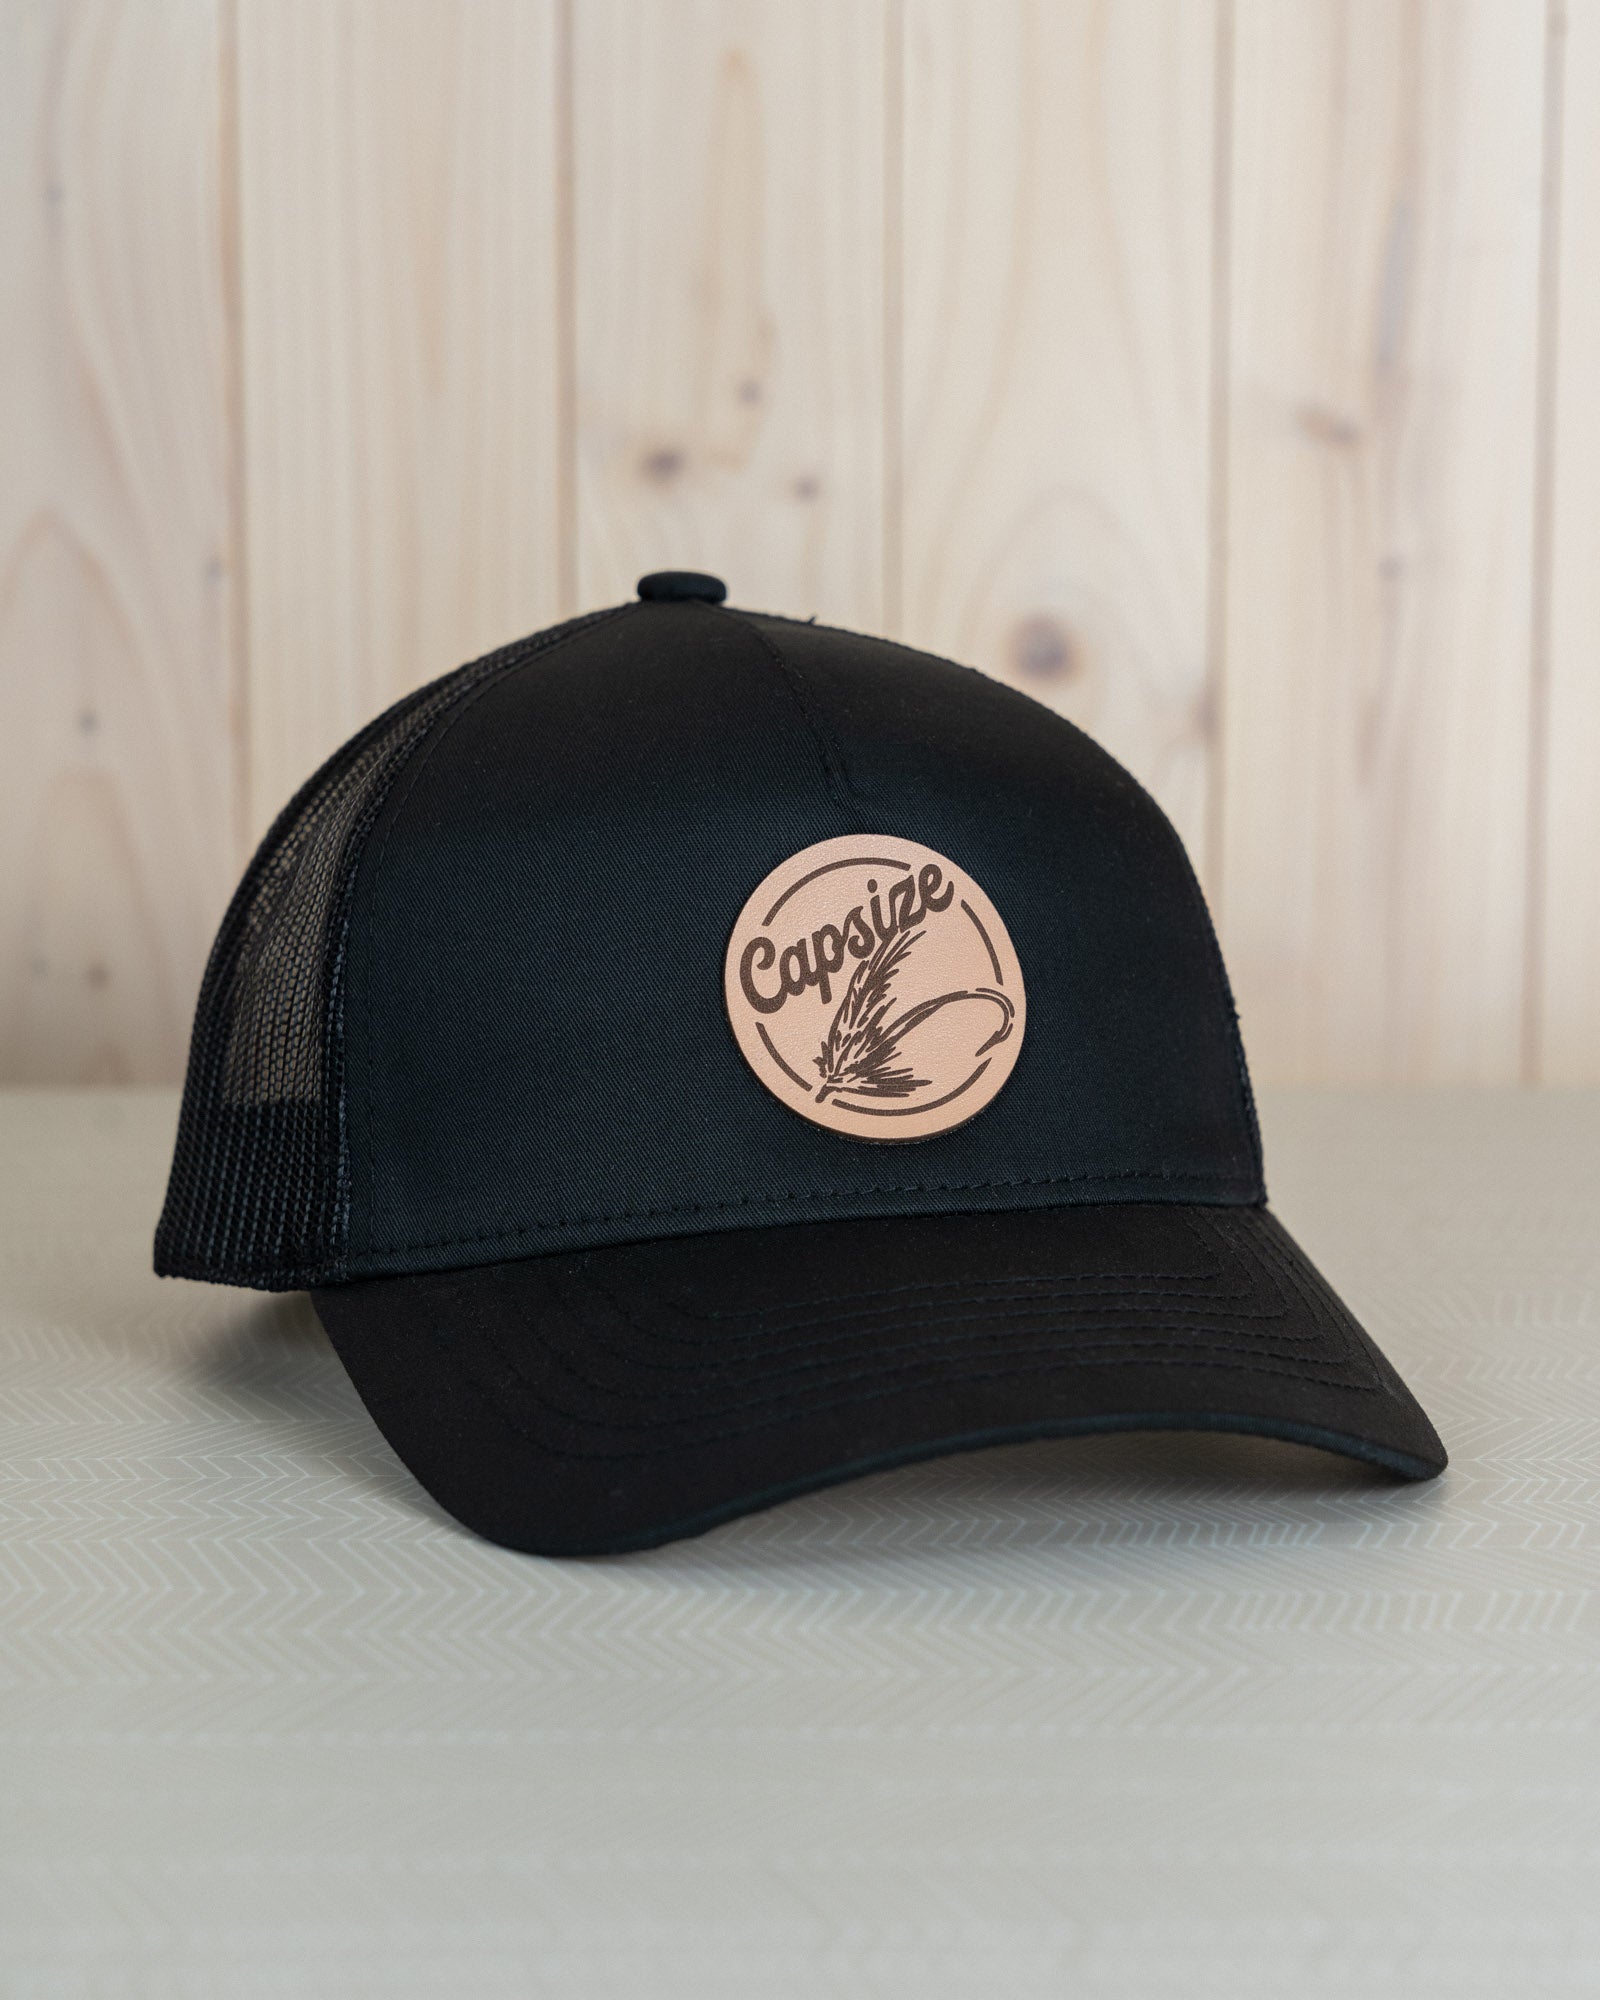 Women Fishing Hat | Leather Fly Ponytail Trucker - Capsize Fly Fishing